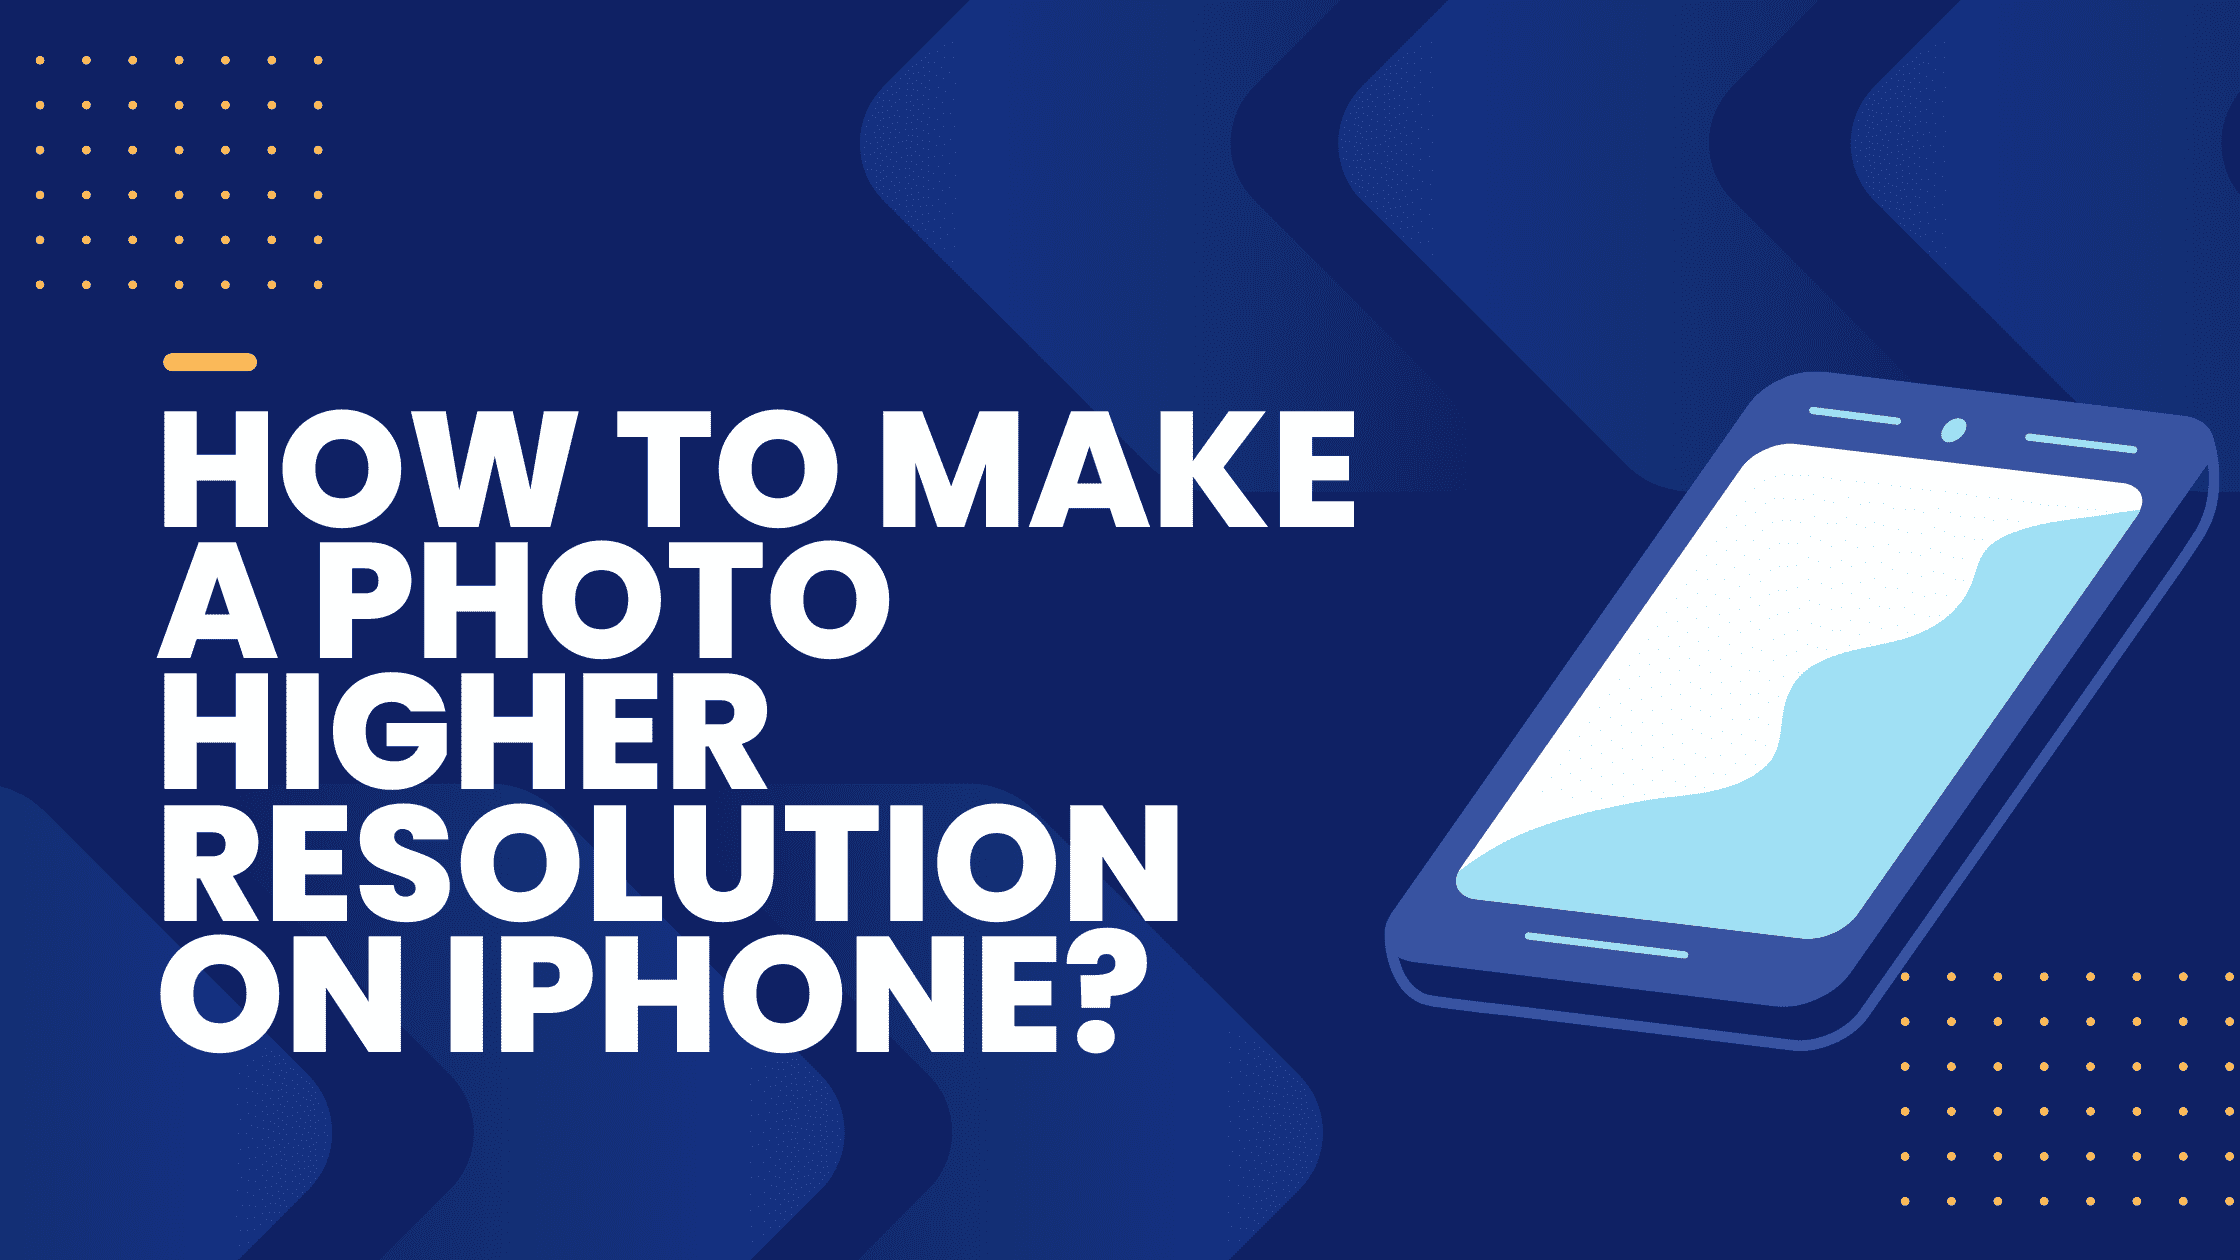 How to make a photo higher resolution on iPhone?